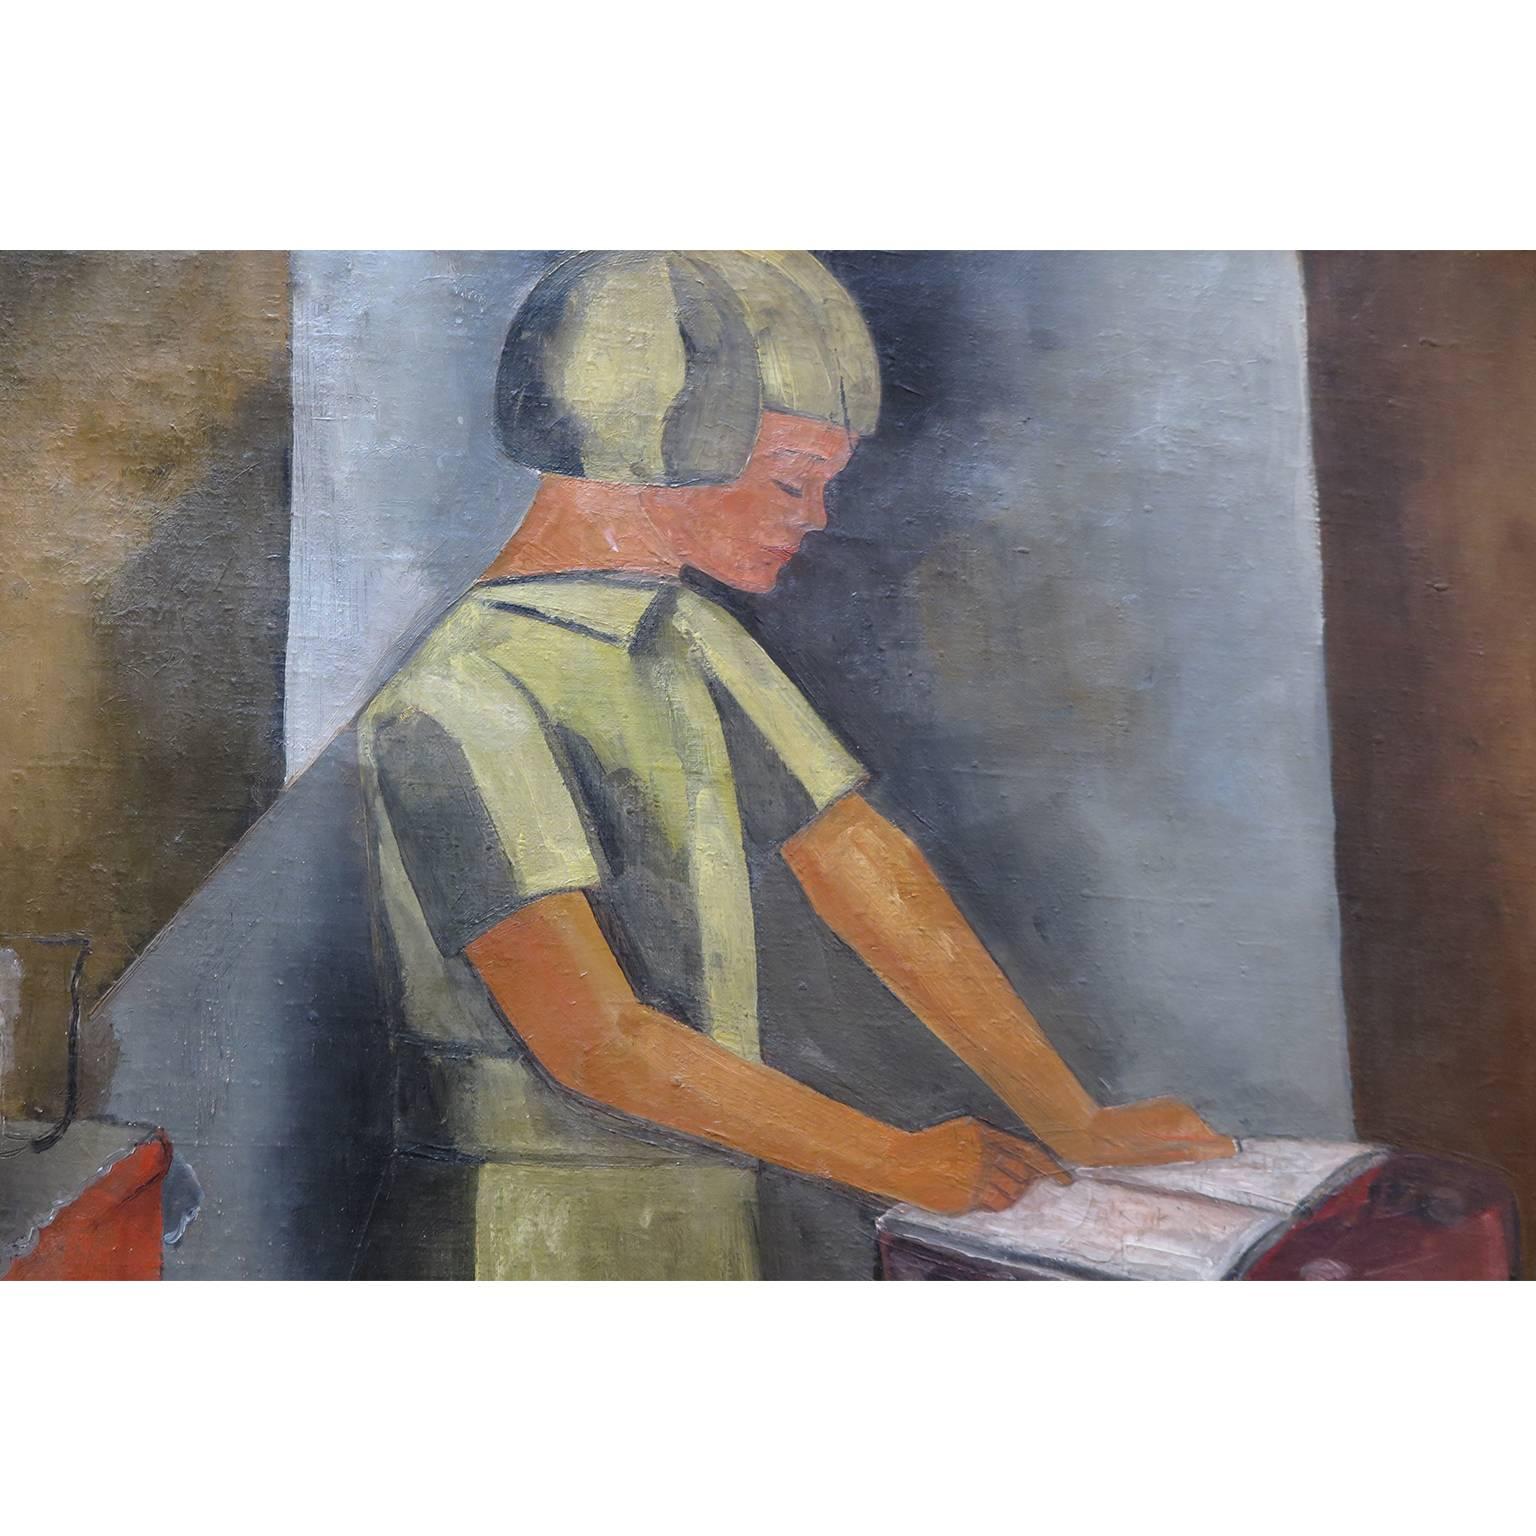 Cubistic painting of a school boy reading. Oil on canvas. Faded signature of lower left hand corner. Newly framed in grey and gold leaf.